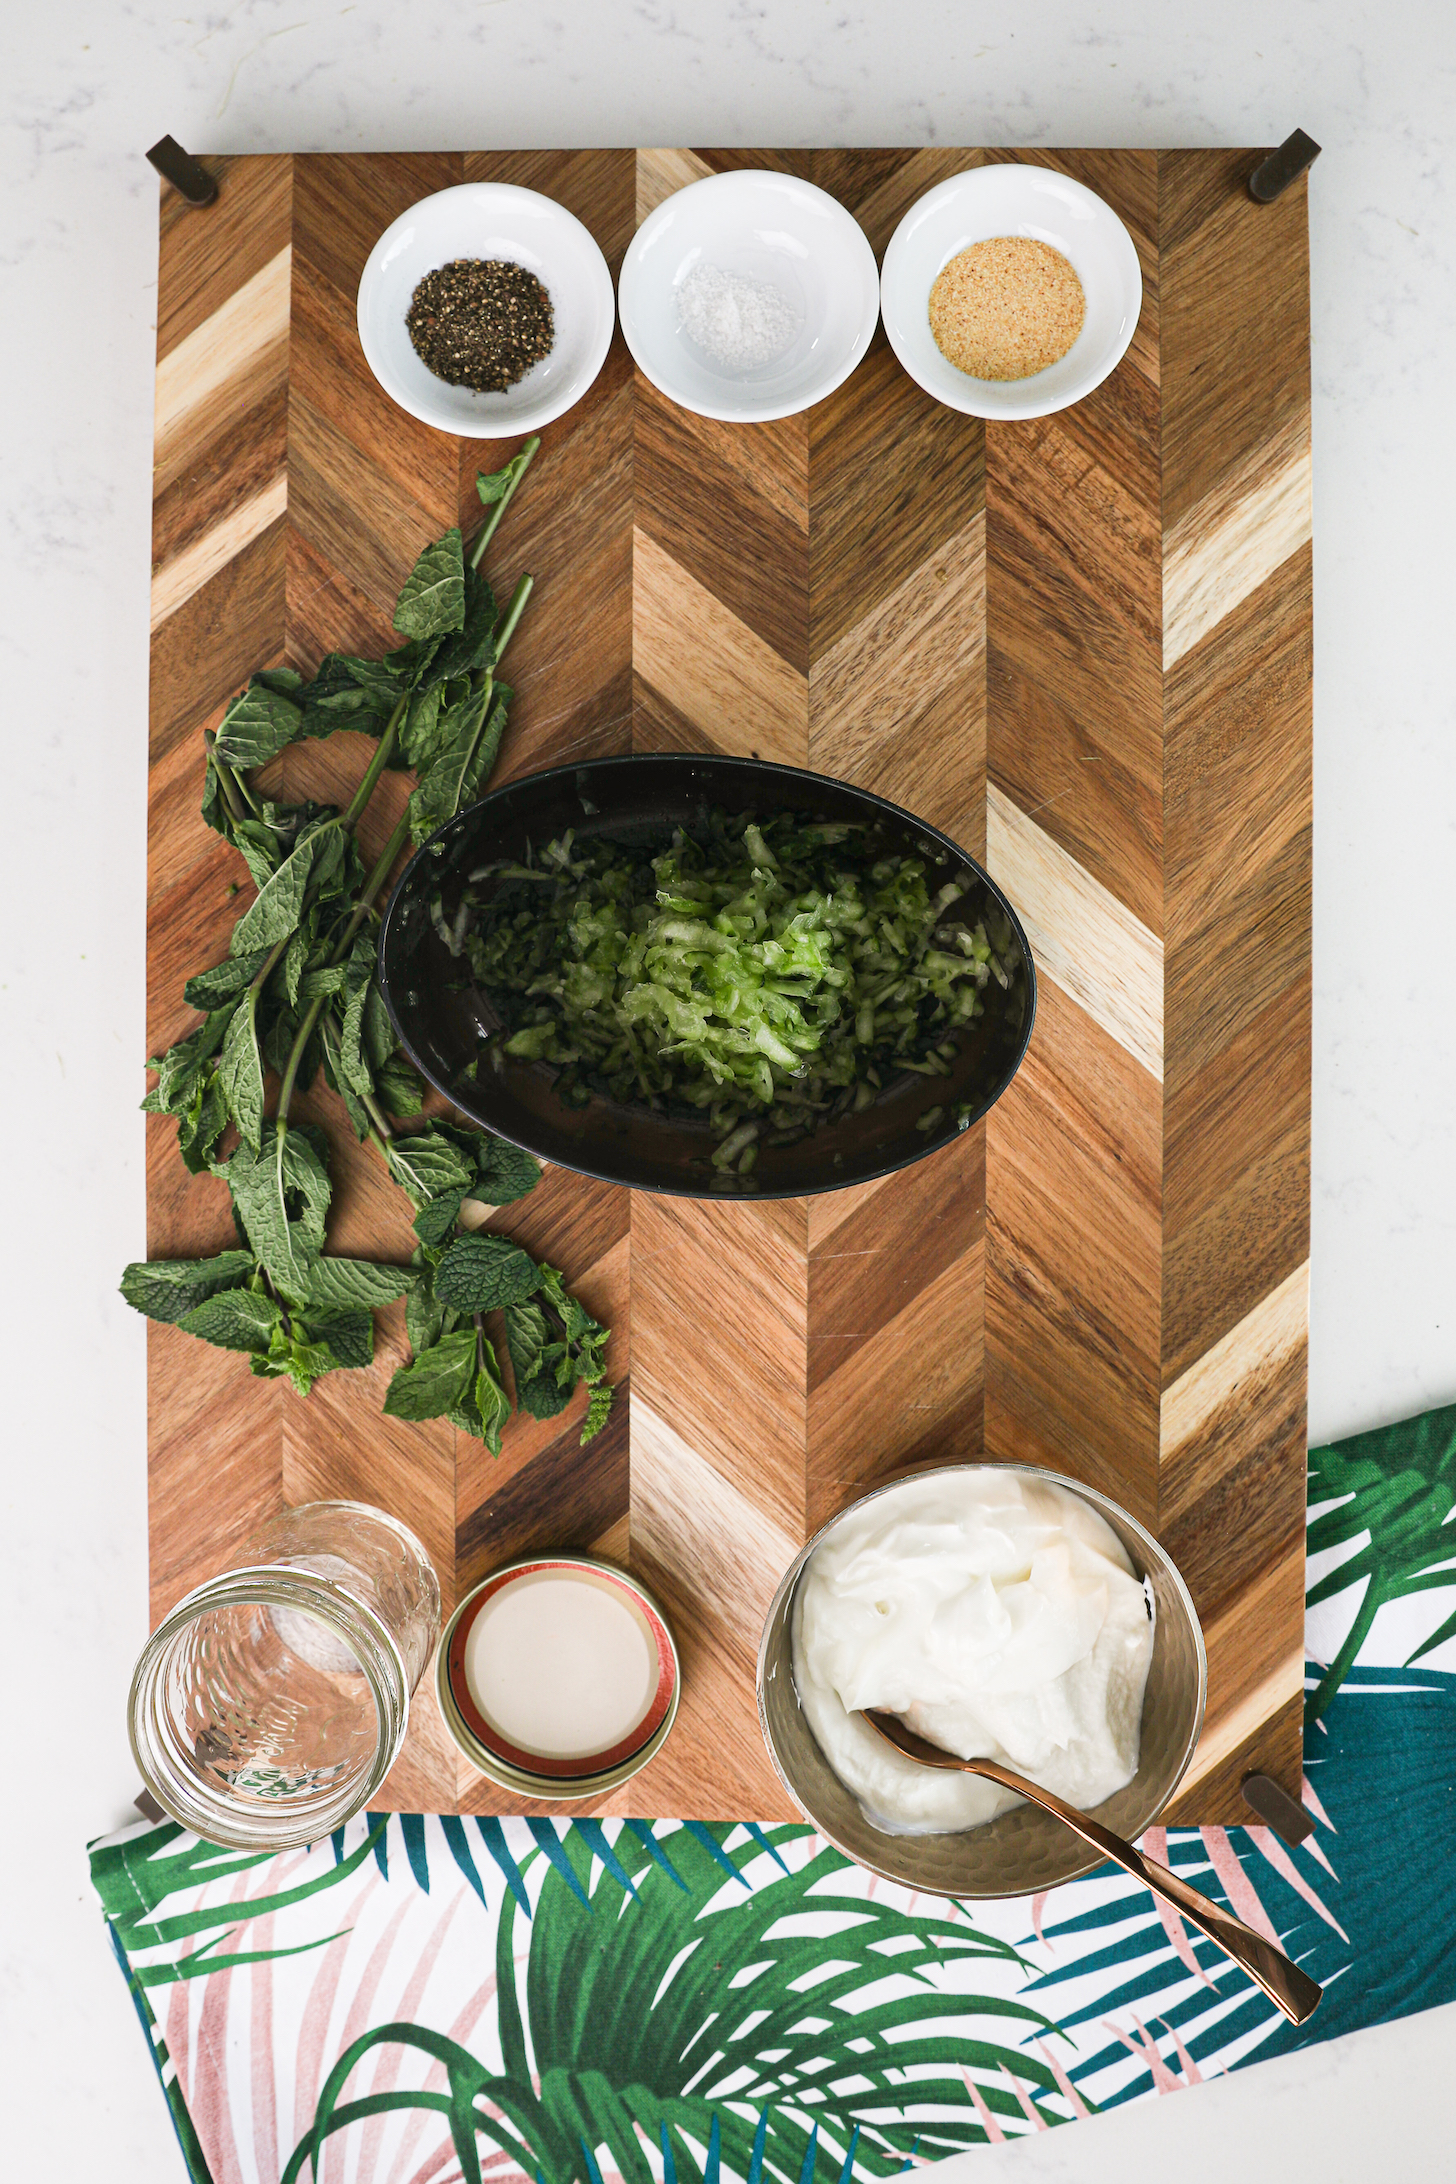 A display of food ingredients on a wooden board, including grated cucumber, spices and yogurt.